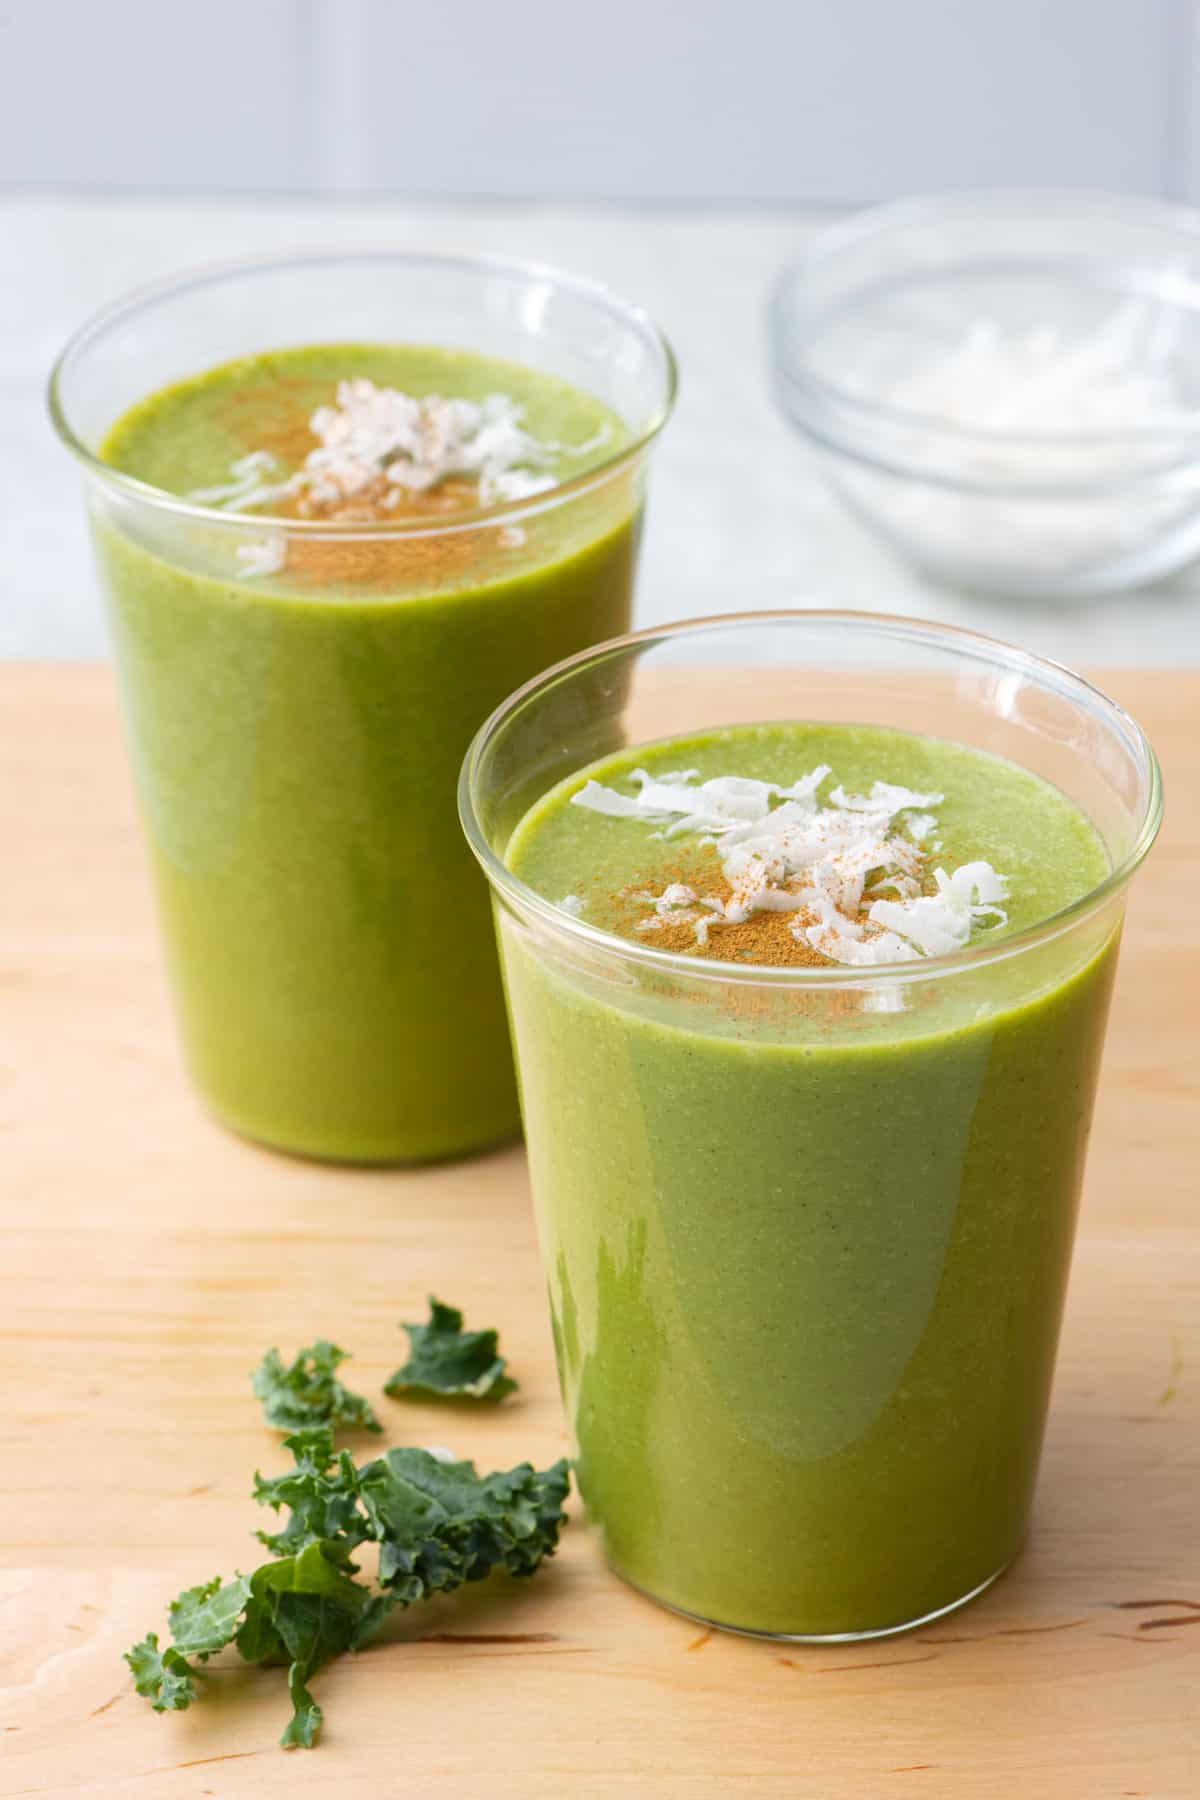 https://feelgoodfoodie.net/wp-content/uploads/2023/03/Kale-Coconut-Smoothie-04.jpg